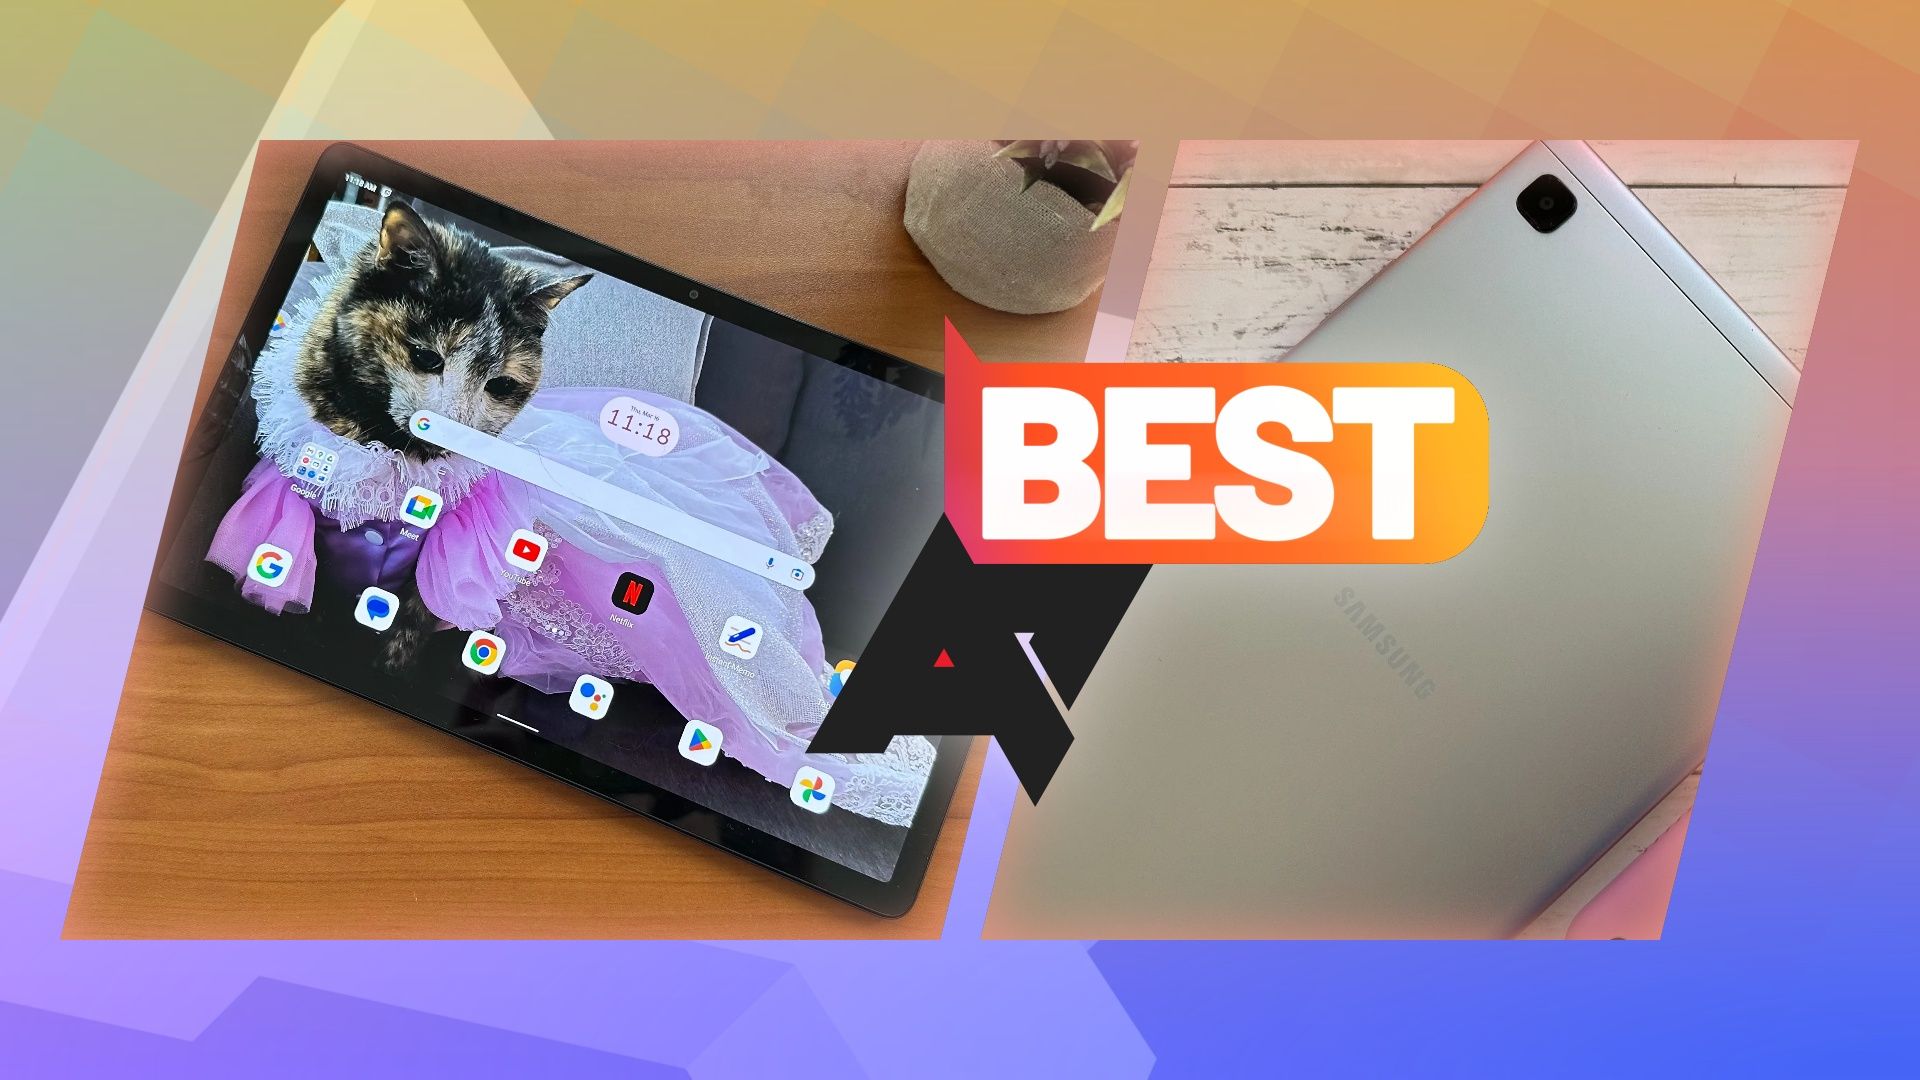 Best cheap Android tablets with two tablets side by side